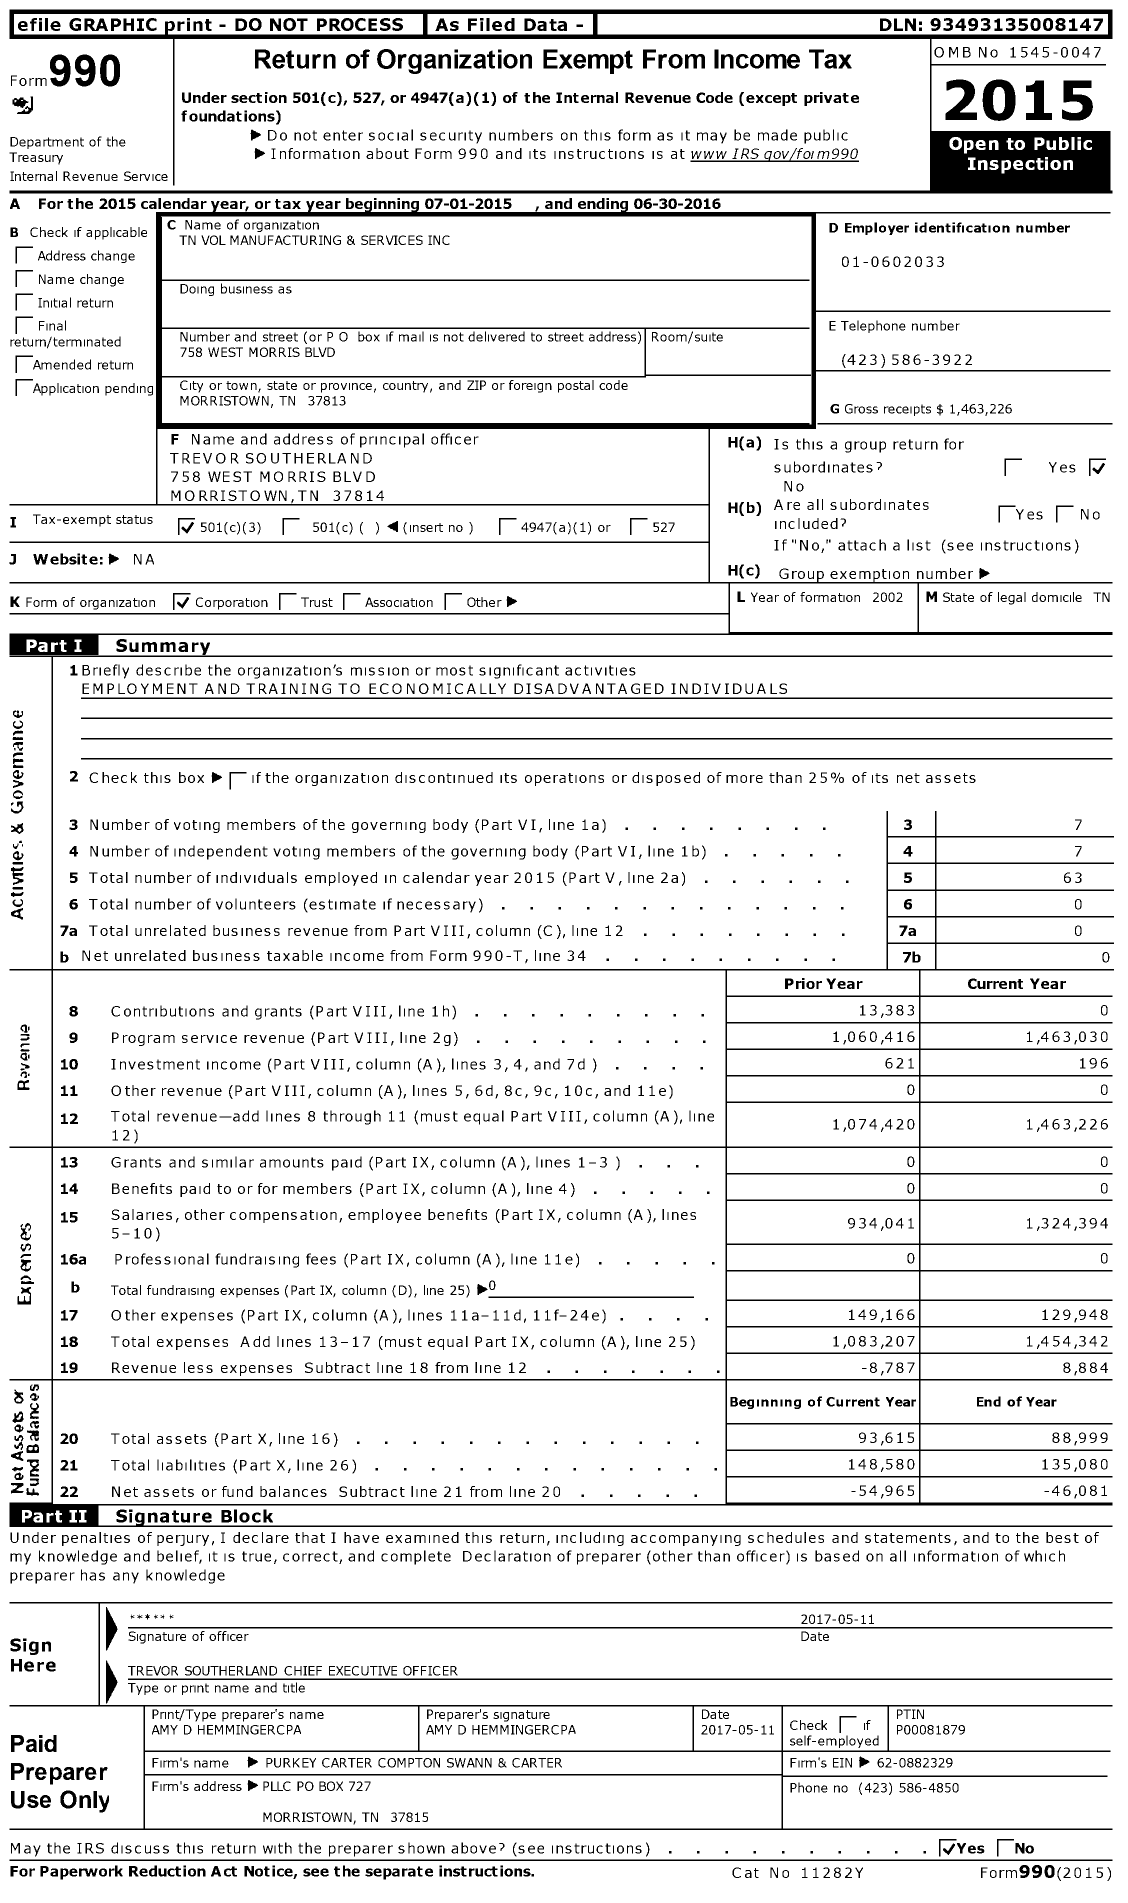 Image of first page of 2015 Form 990 for TN Vol Manufacturing and Services